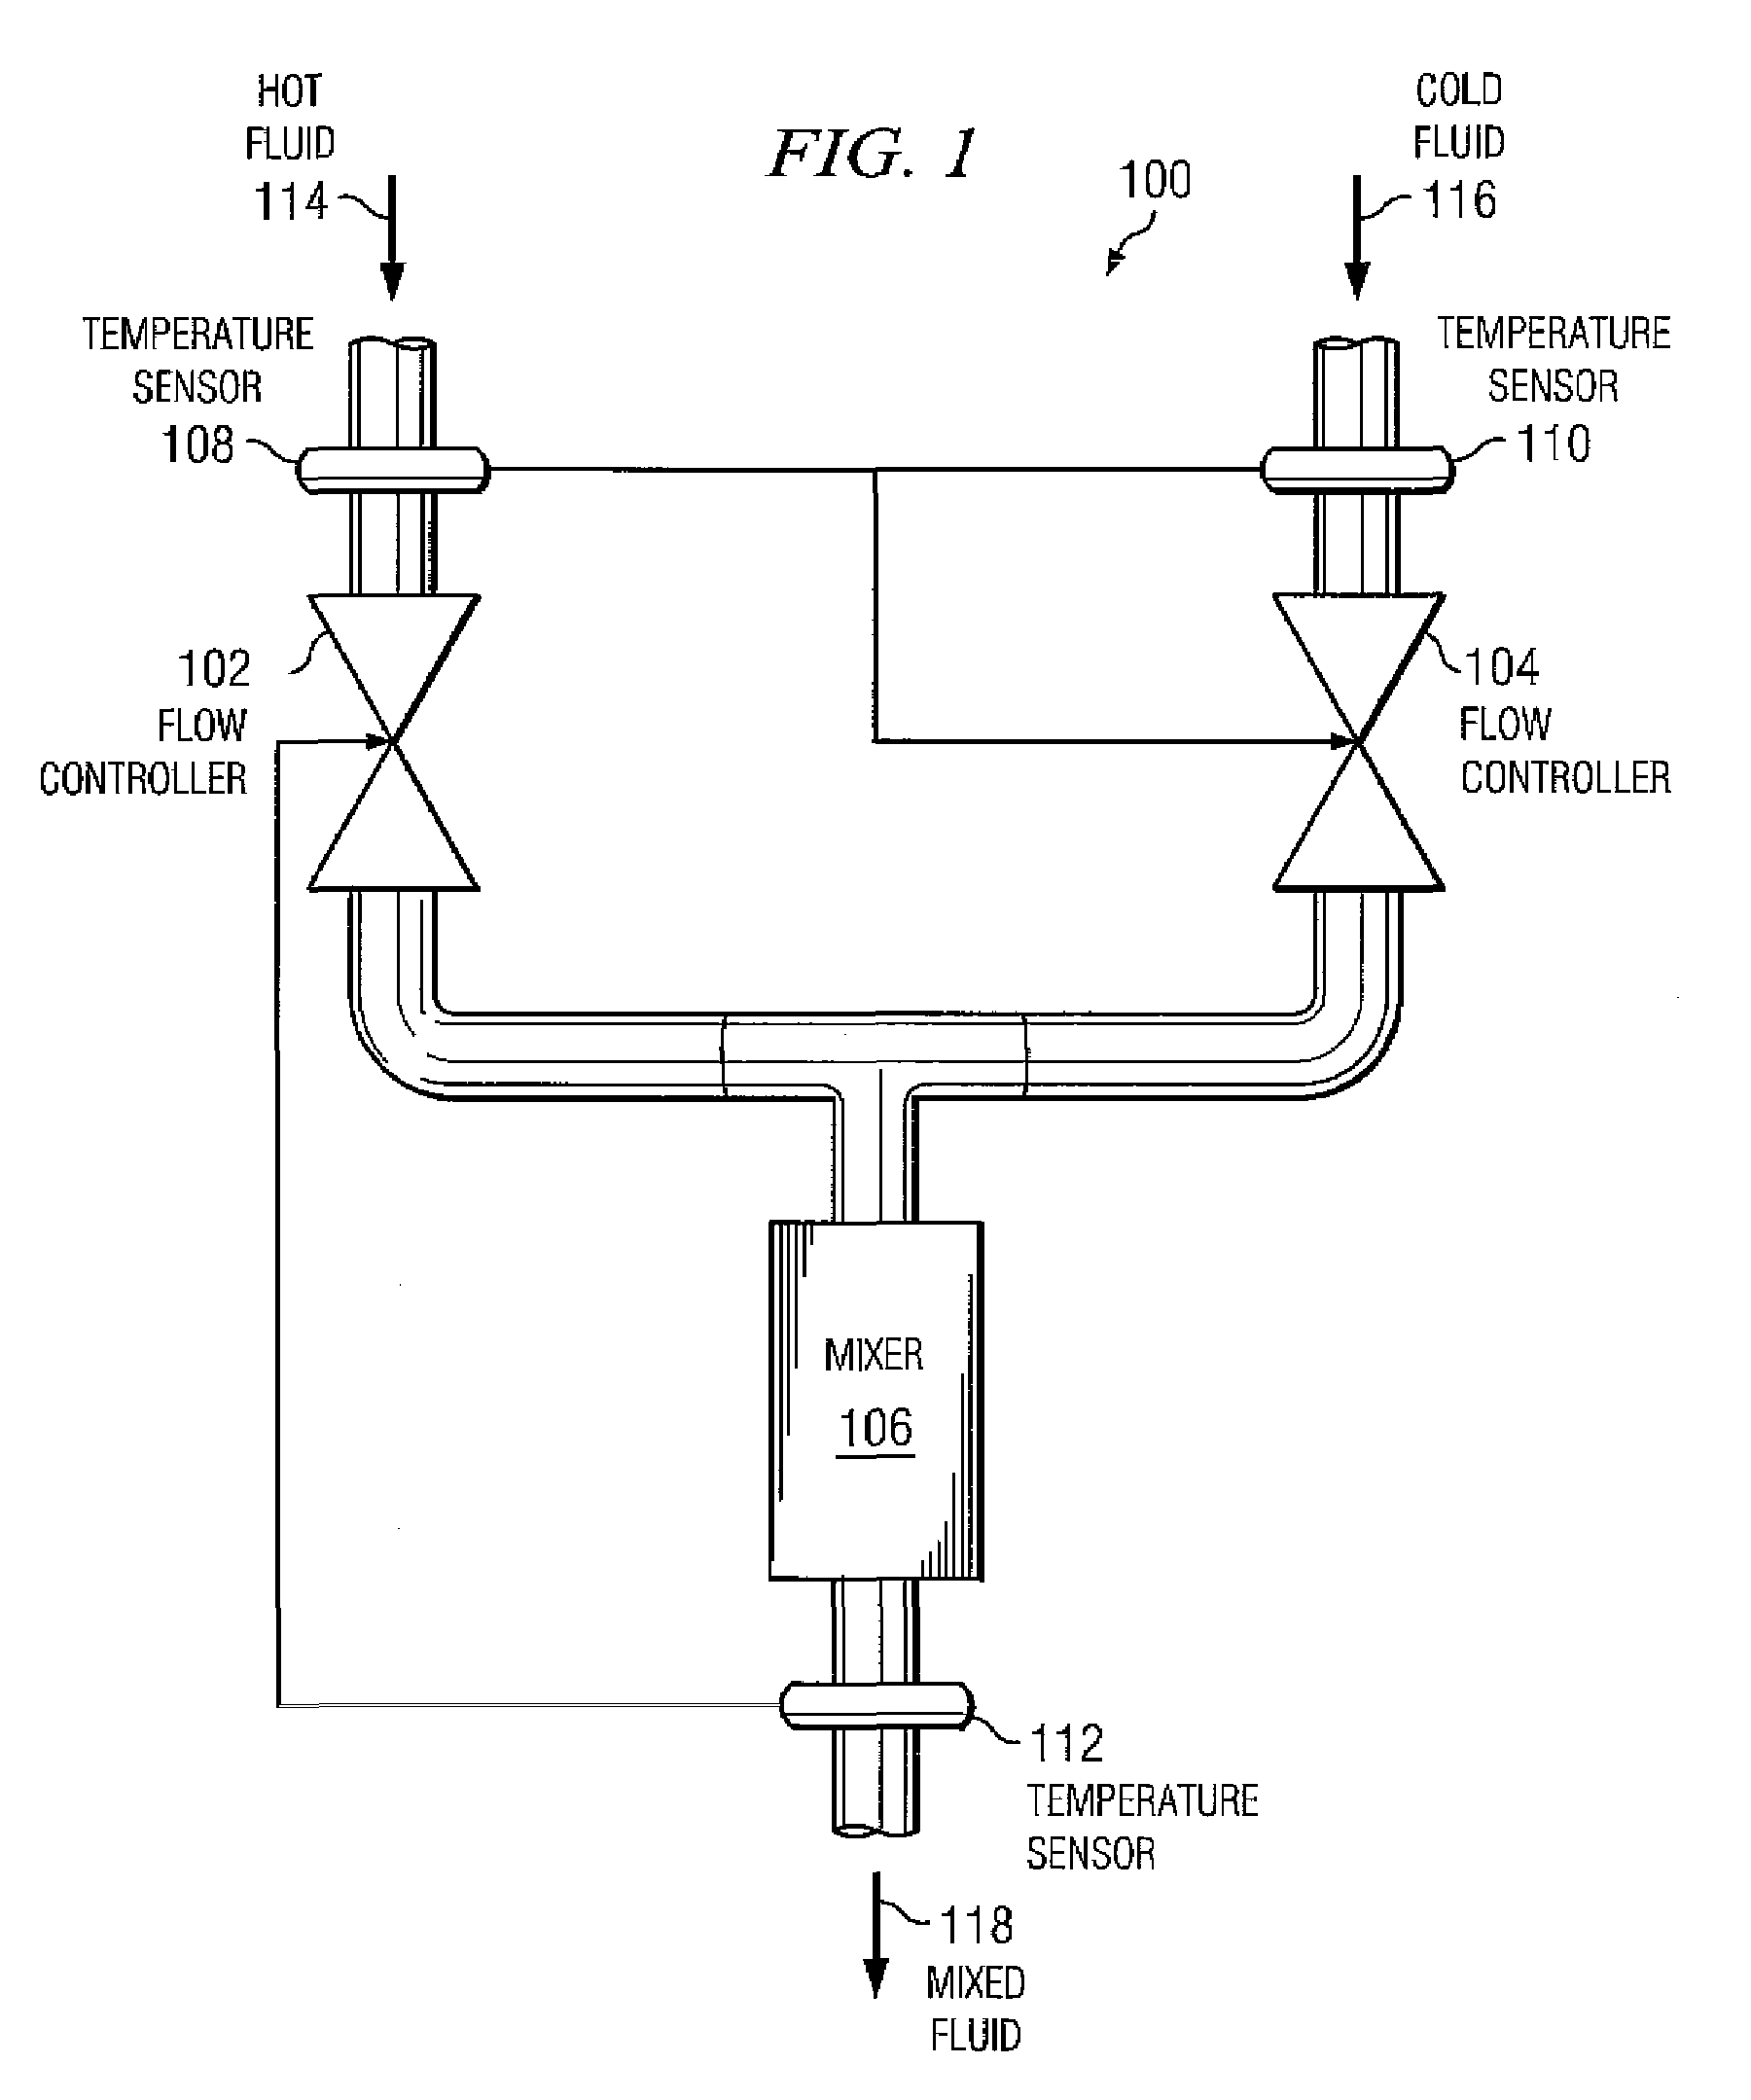 System and method for controlled mixing of fluids via temperature